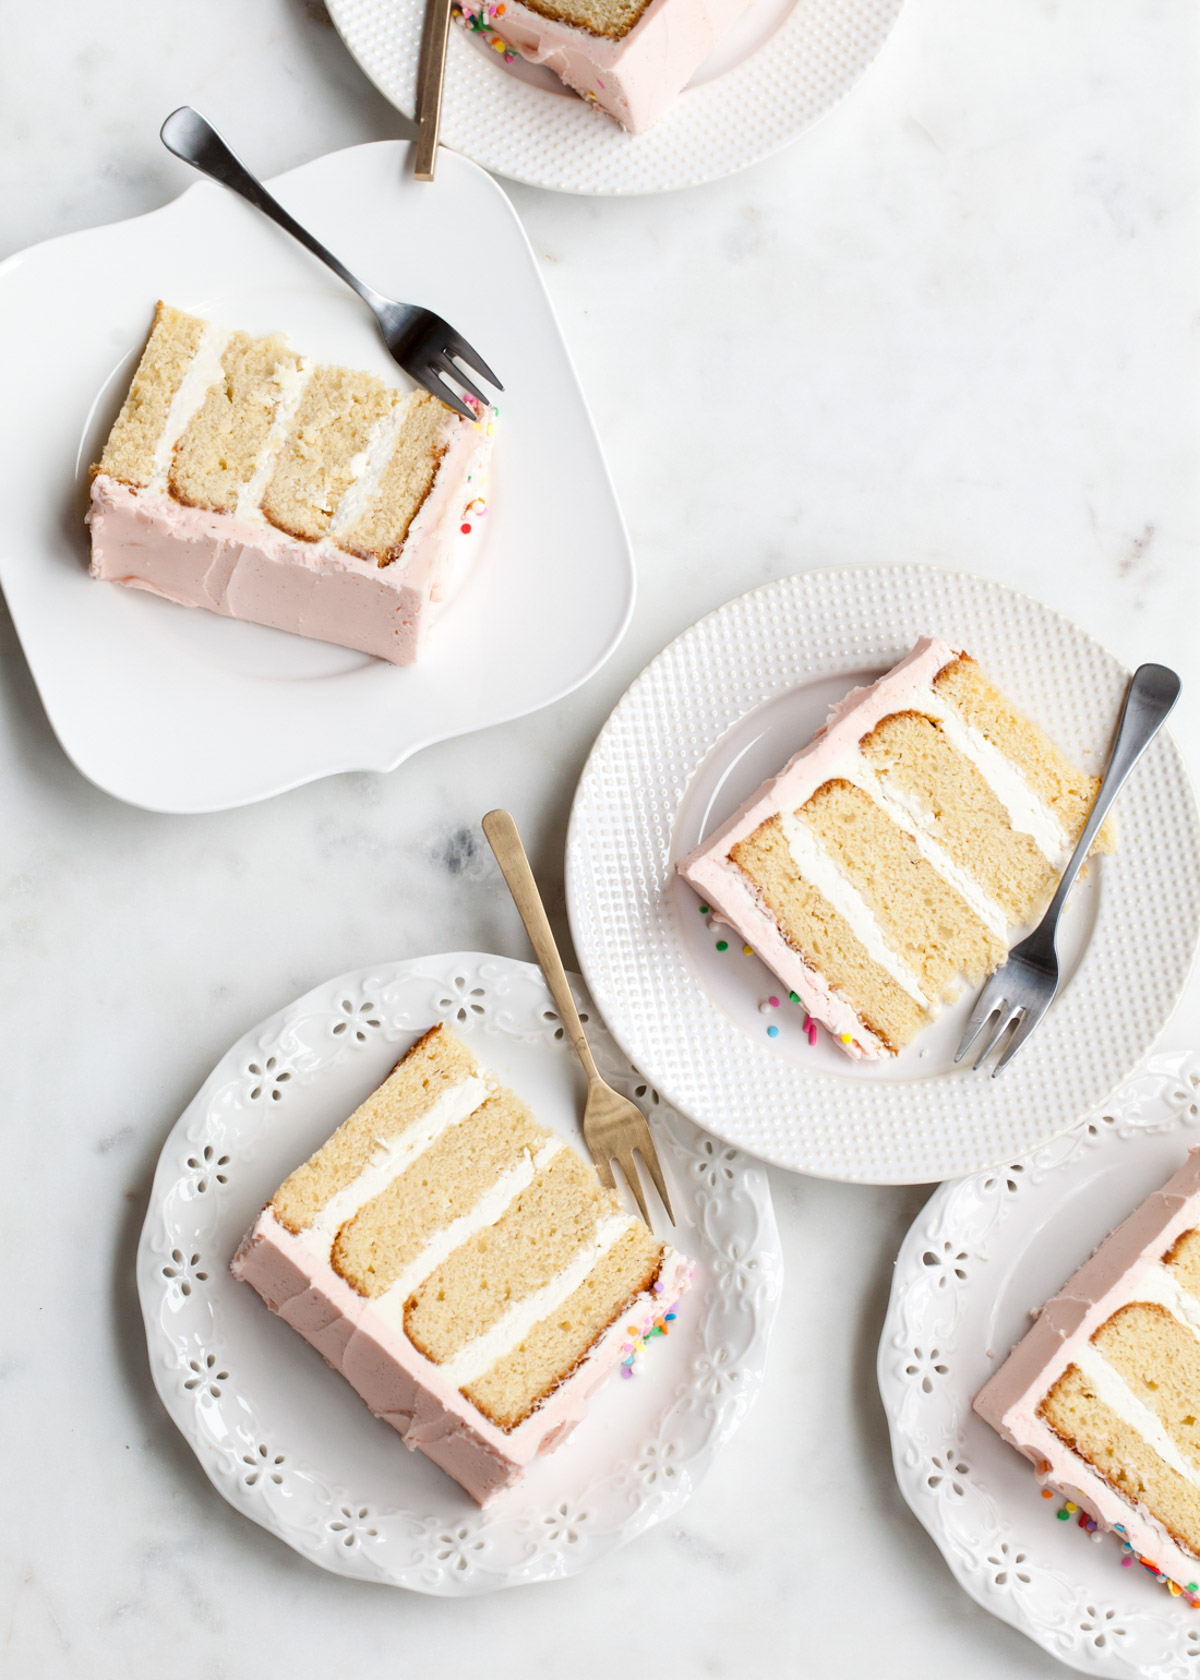 Slices of vanilla bean layer cake with pink buttercream